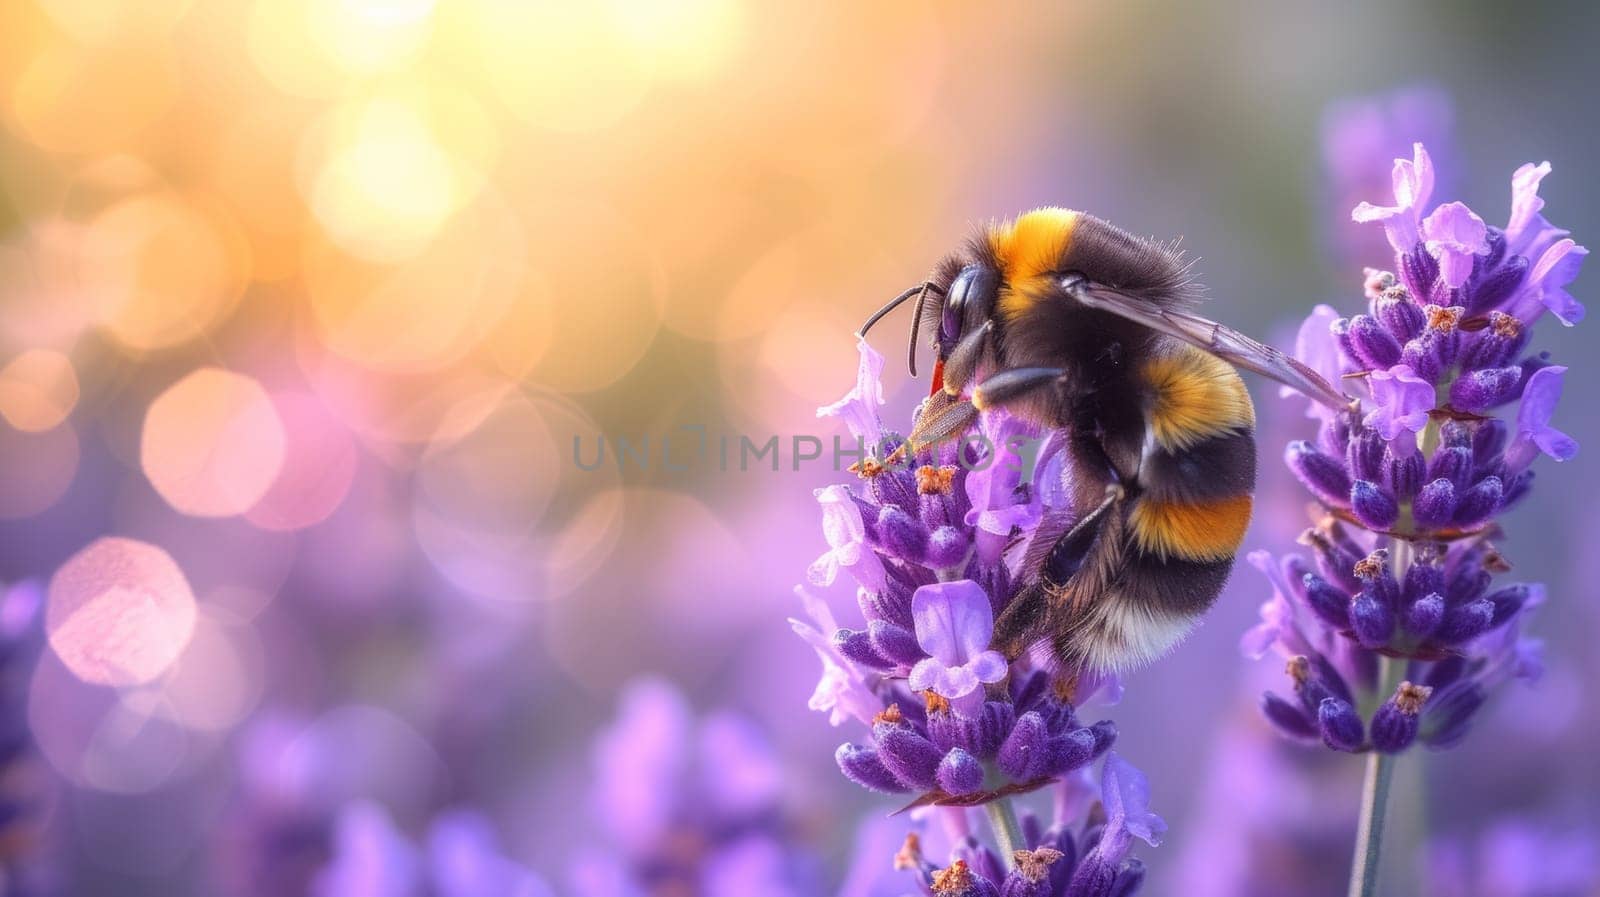 A bee is on a lavender flower with blurred background